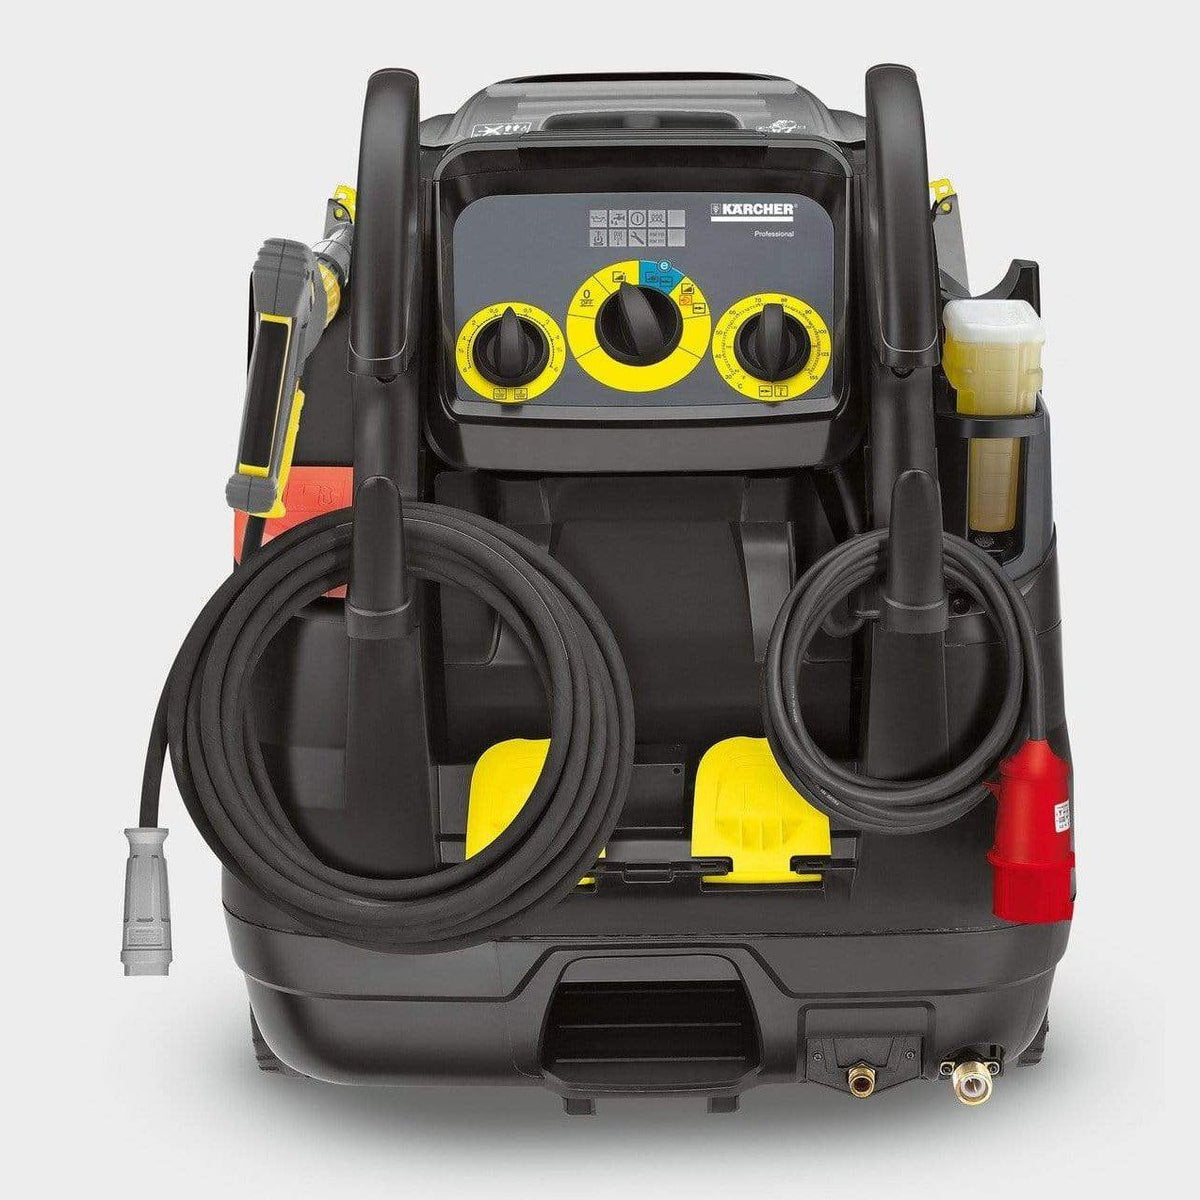 Karcher Hot and Cold High Pressure Washer 180 Bar - HDS 8/18-4 M | Supply Master | Accra, Ghana Tools Building Steel Engineering Hardware tool